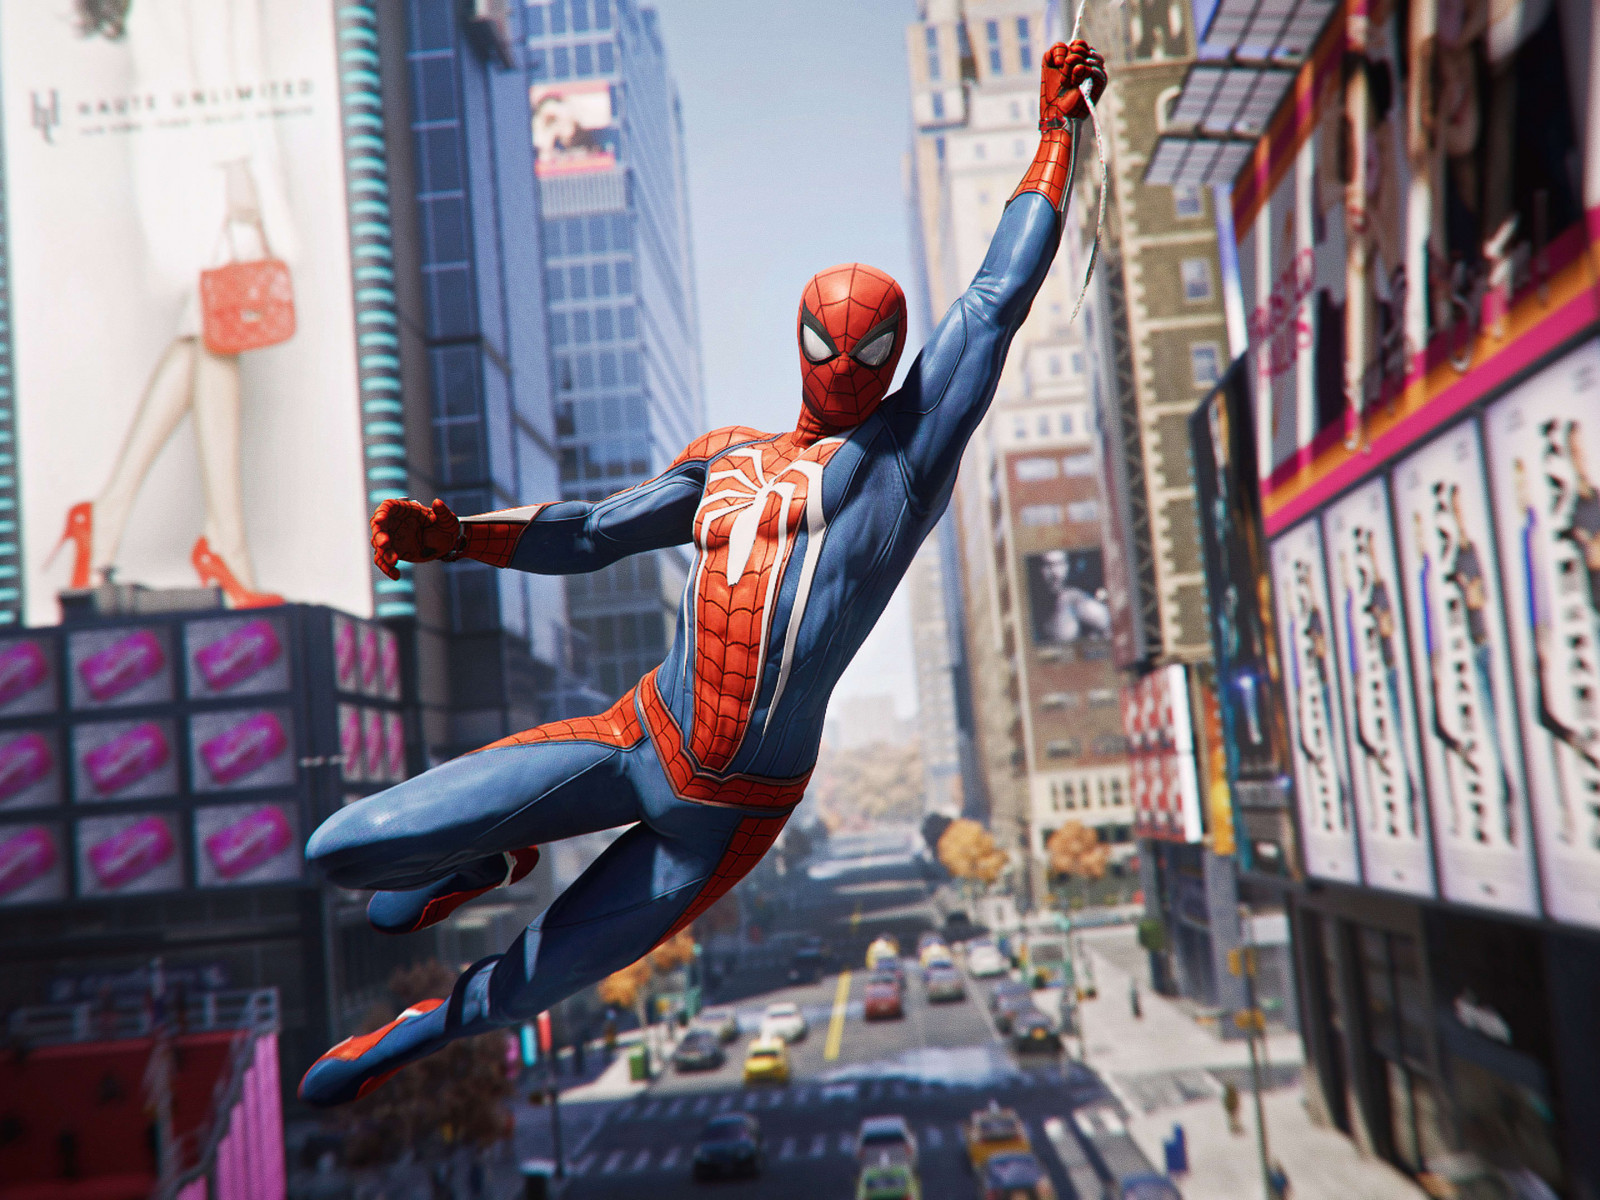 Spider Man from the video game wallpaper 1600x1200